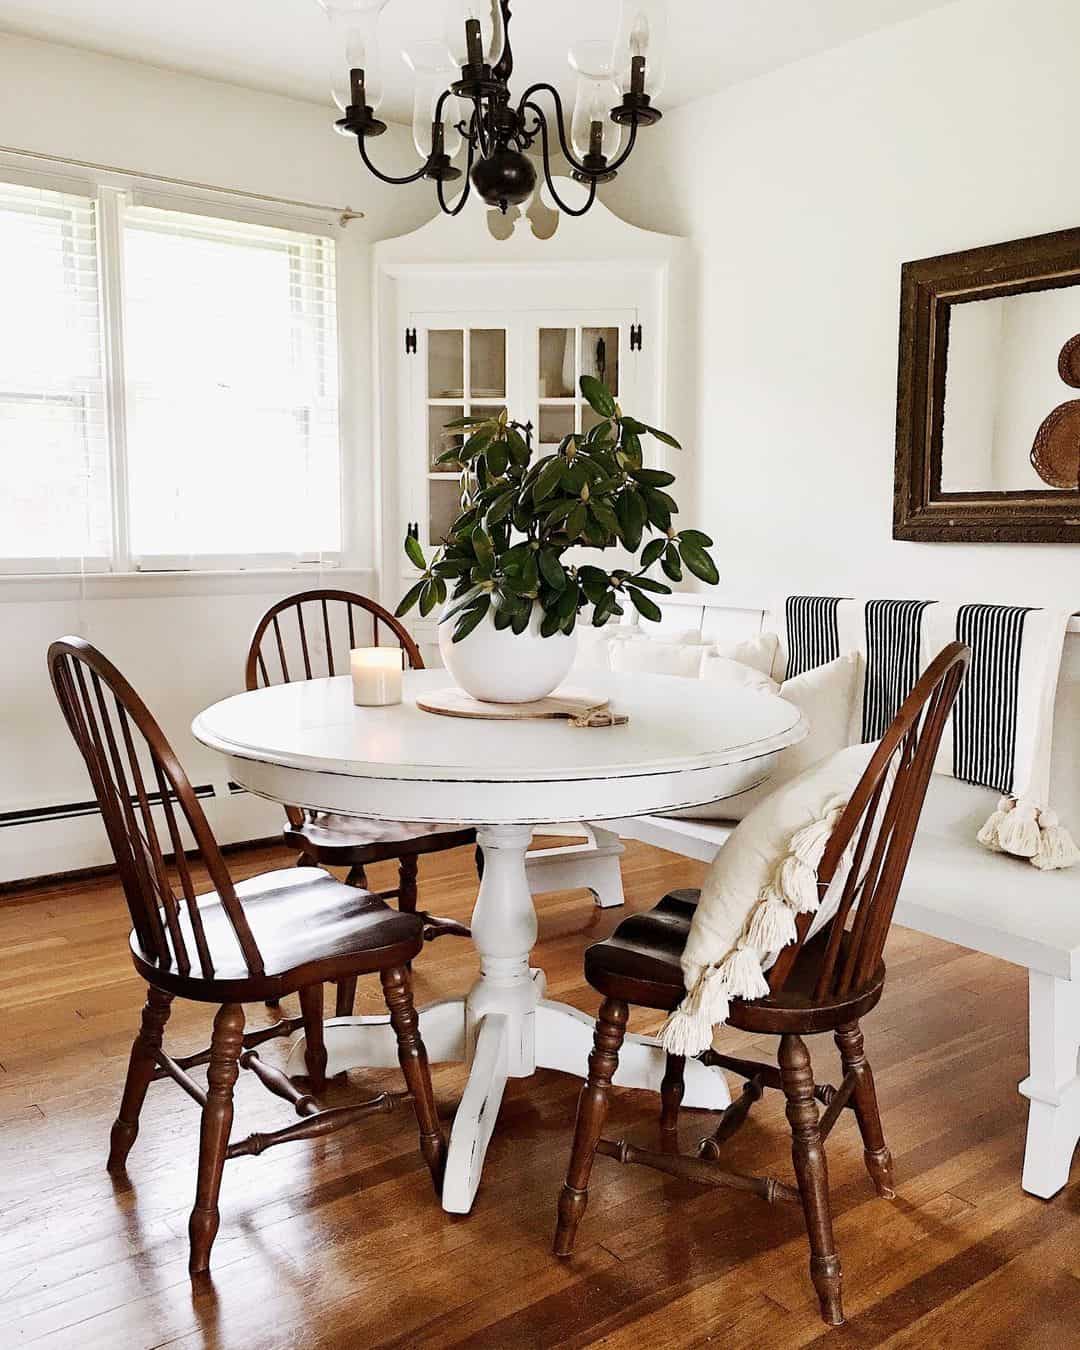 Eclectic Seating Around a Central Table